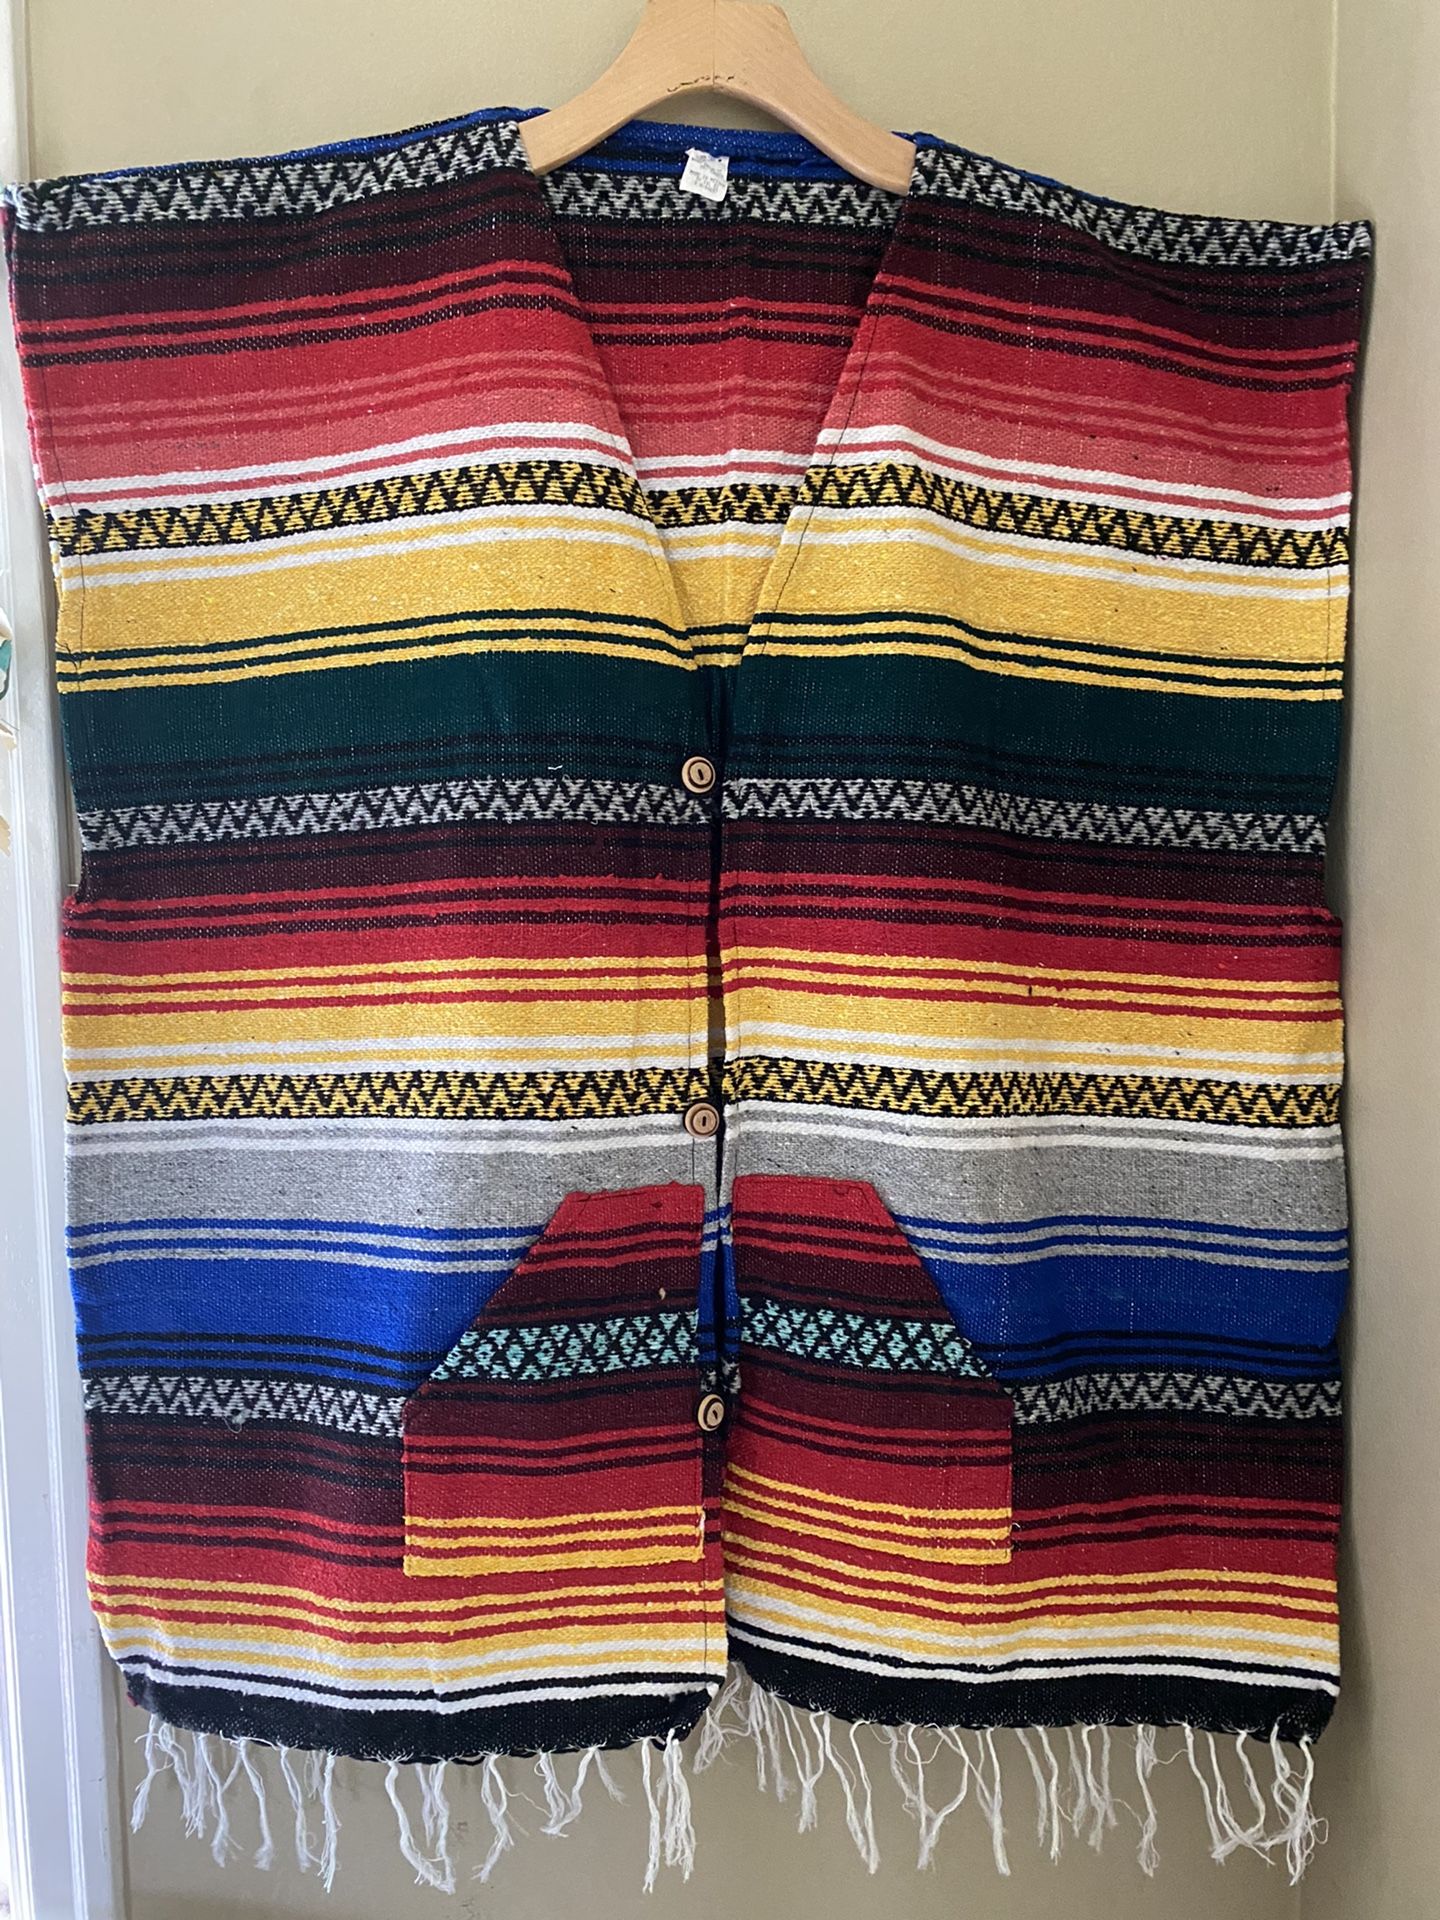 Colorful Striped Mexican Blanket Poncho VEST #7 western cowboy costume XXL 2X